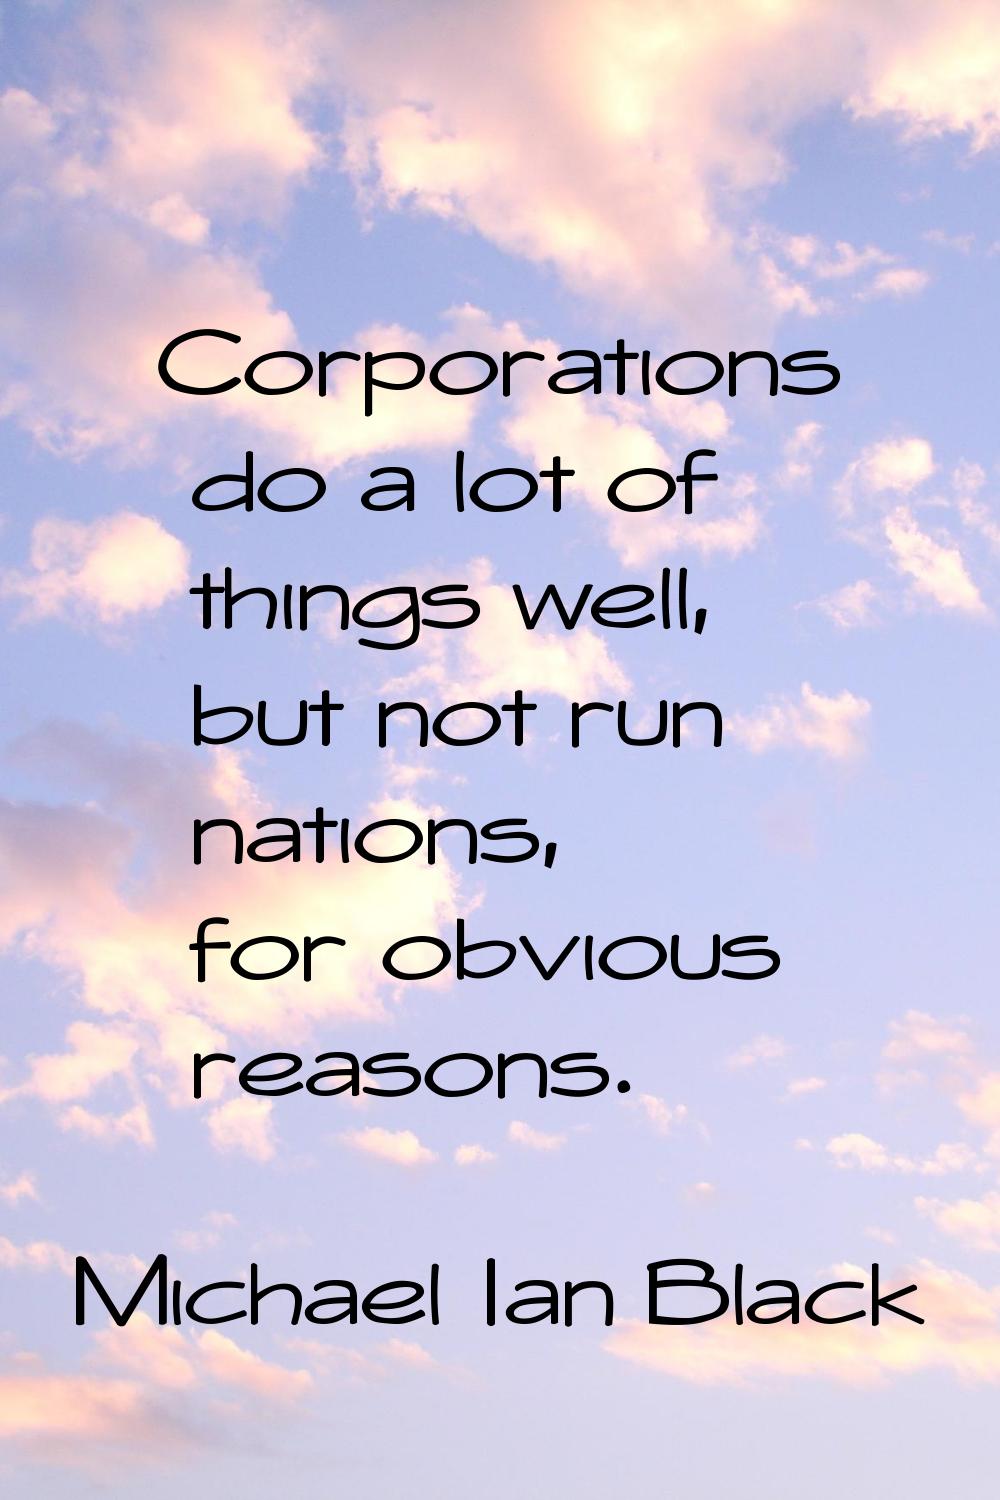 Corporations do a lot of things well, but not run nations, for obvious reasons.